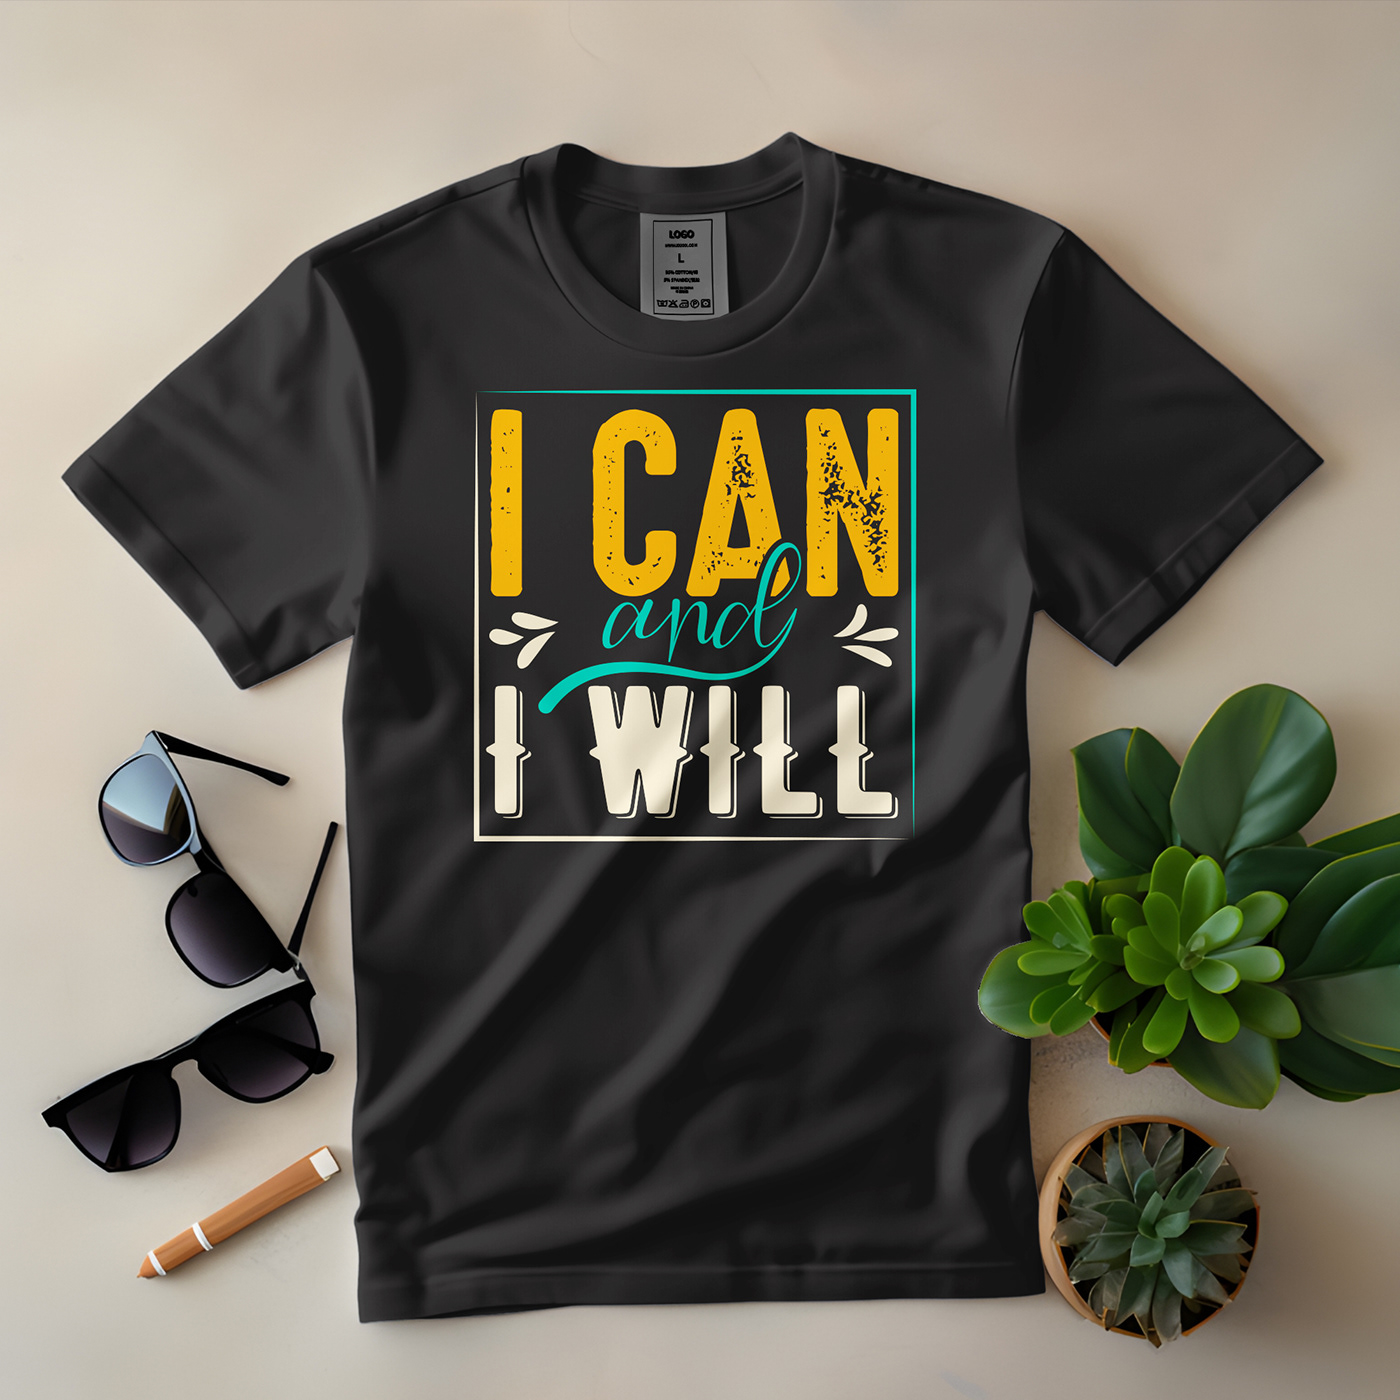 text t-shirt Clothing Style Fashion  typography   Typography T-shirt Tshirt Design tshirts text t shirt design